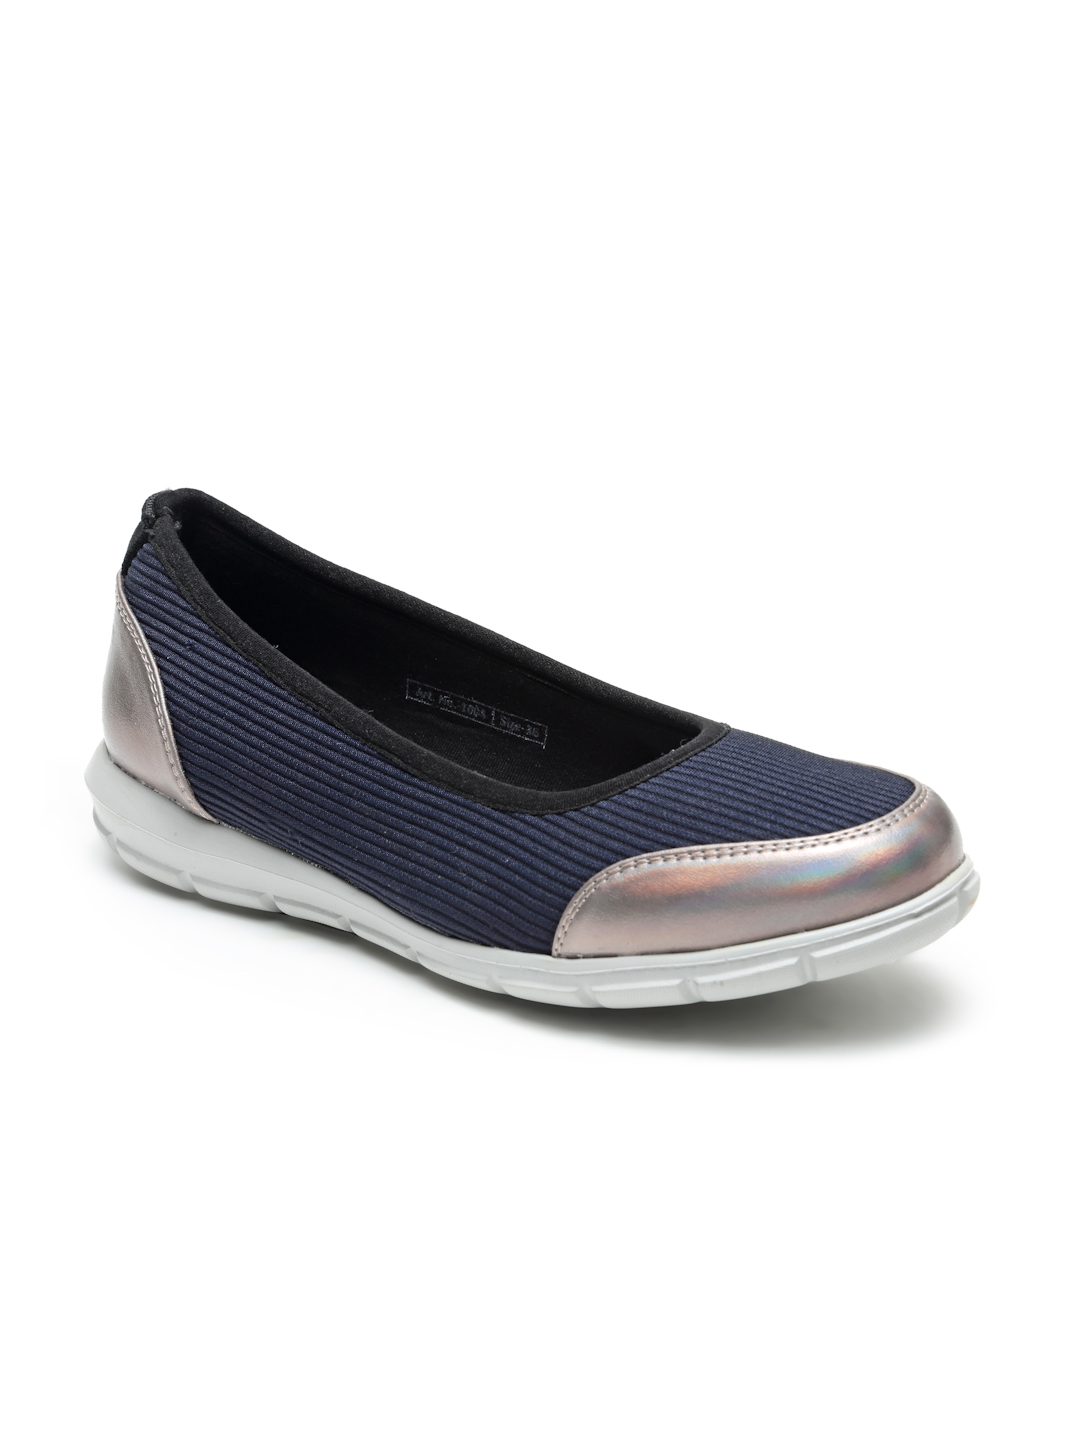 VON WELLX GERMANY comfort women's blue casual shoes ALICE